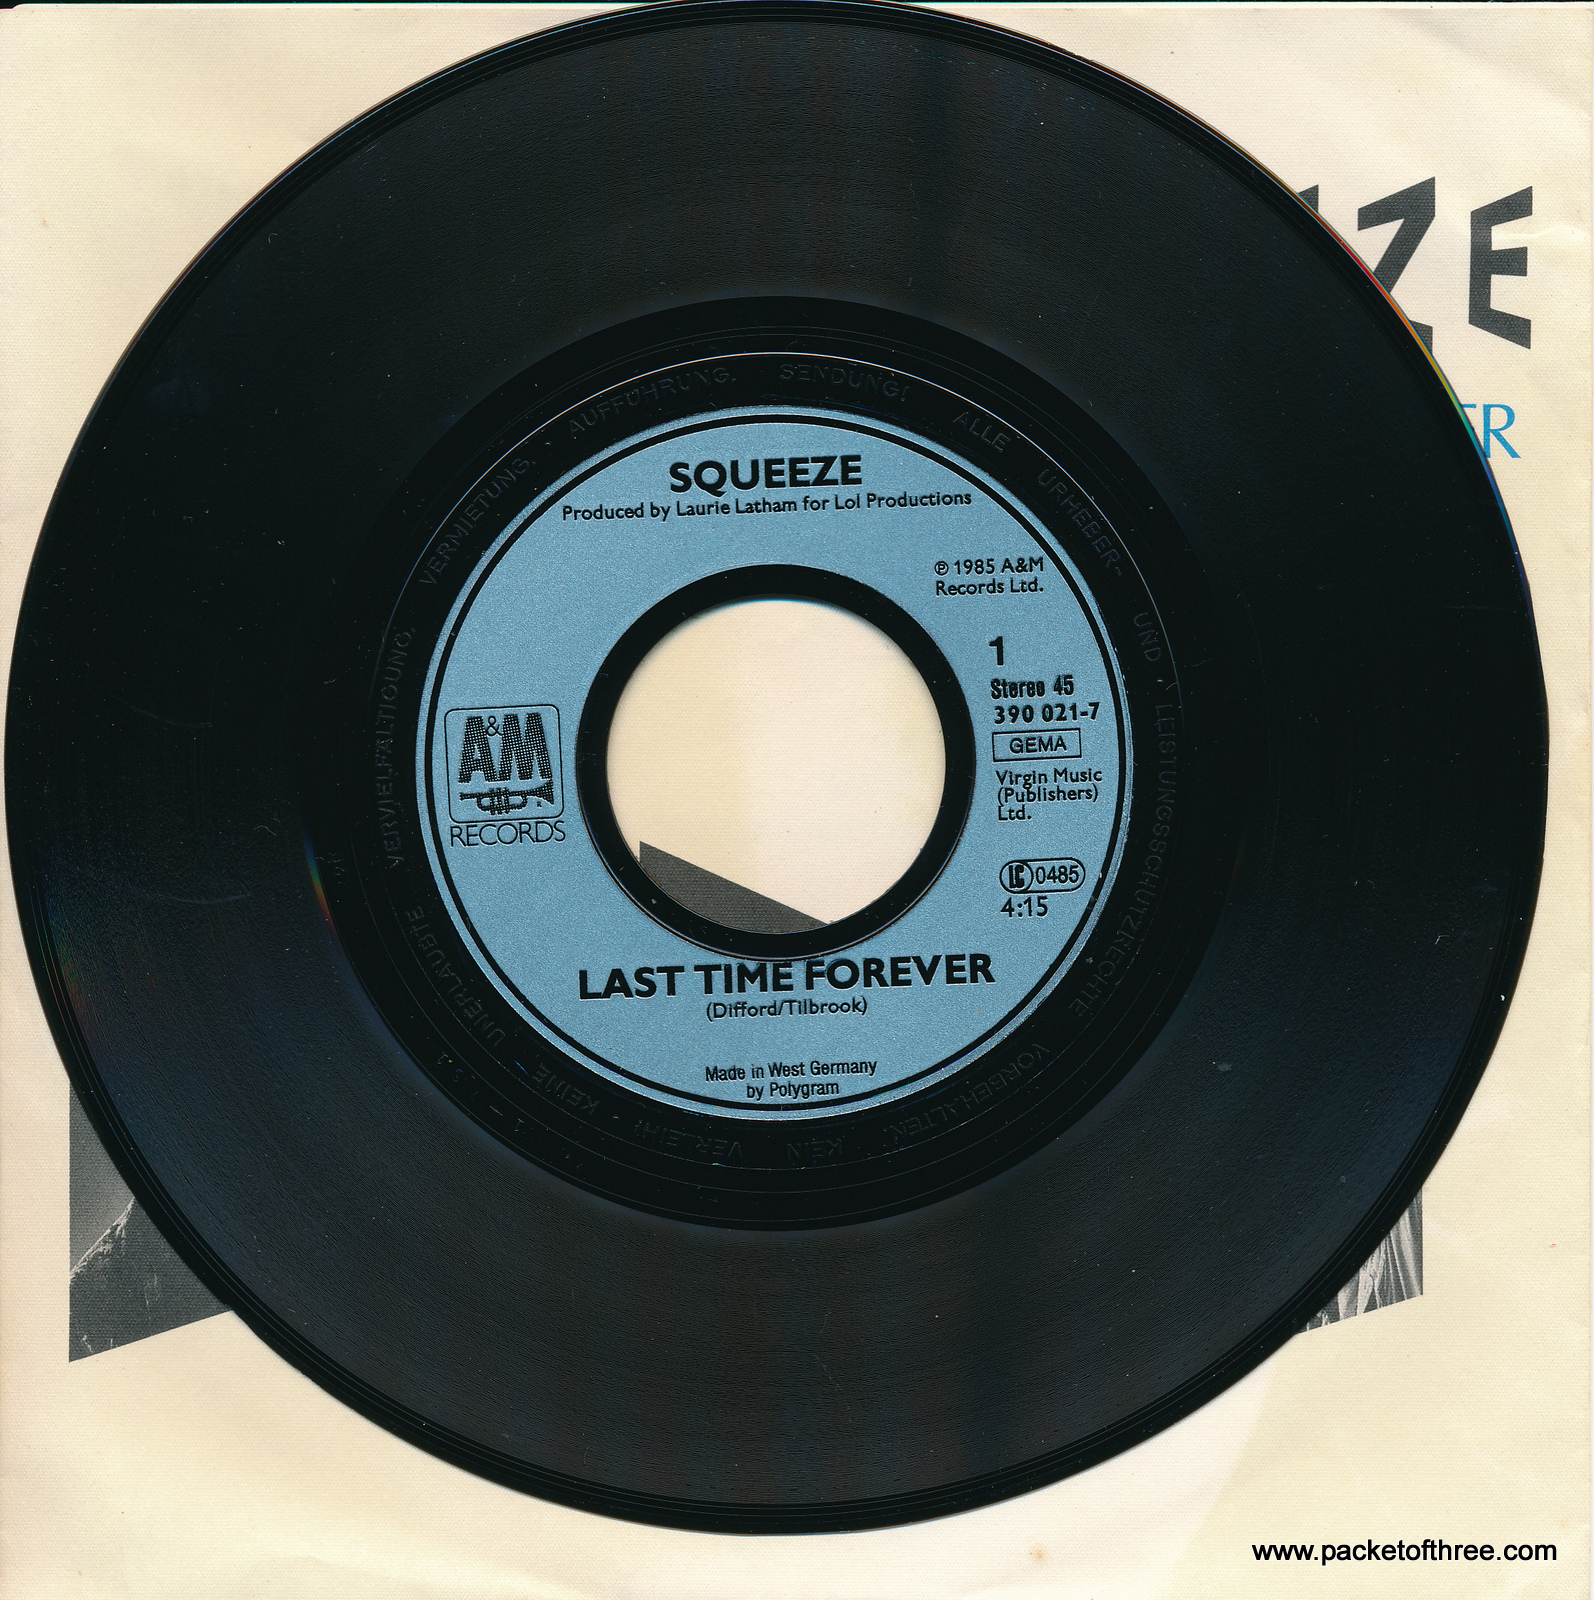 Squeeze - Last Time Forever - Germany - 7" - picture sleeve